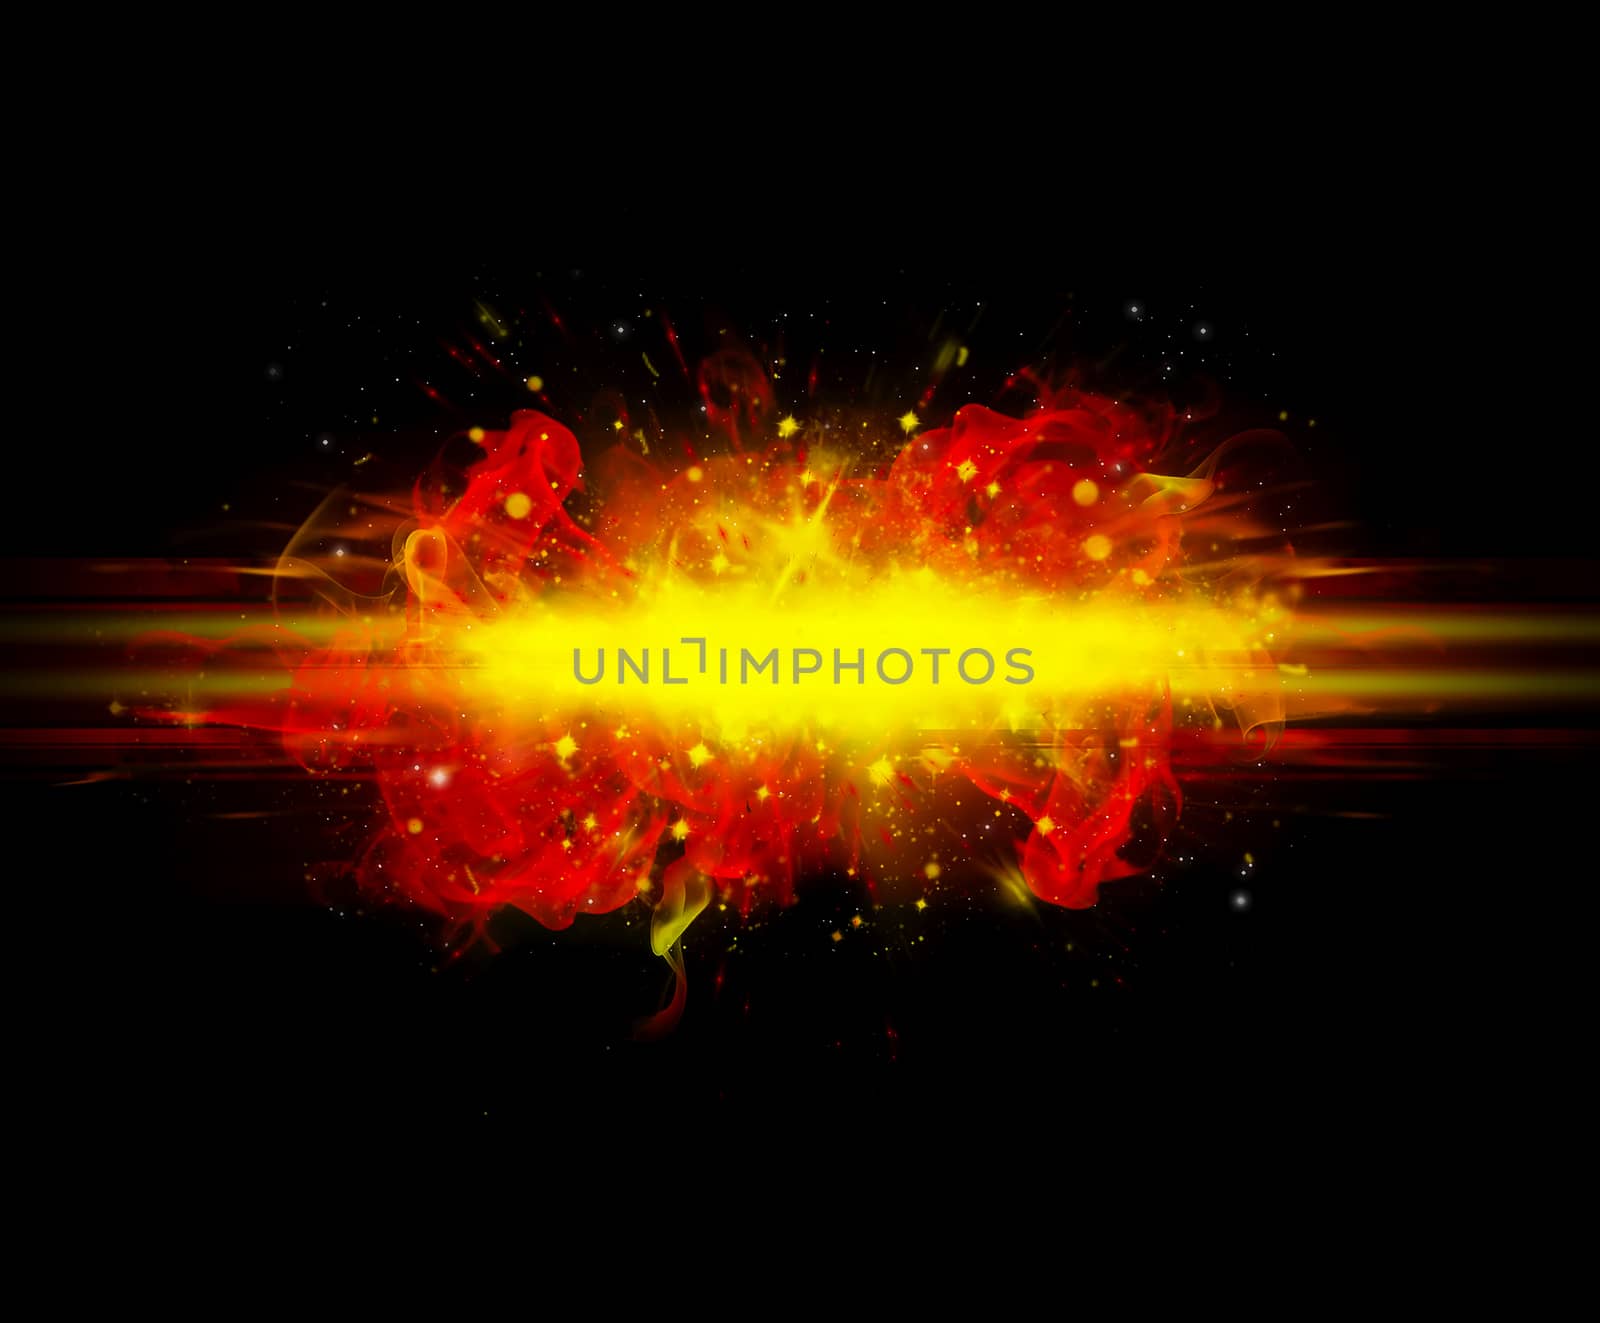 black abstract background with red flame explosion